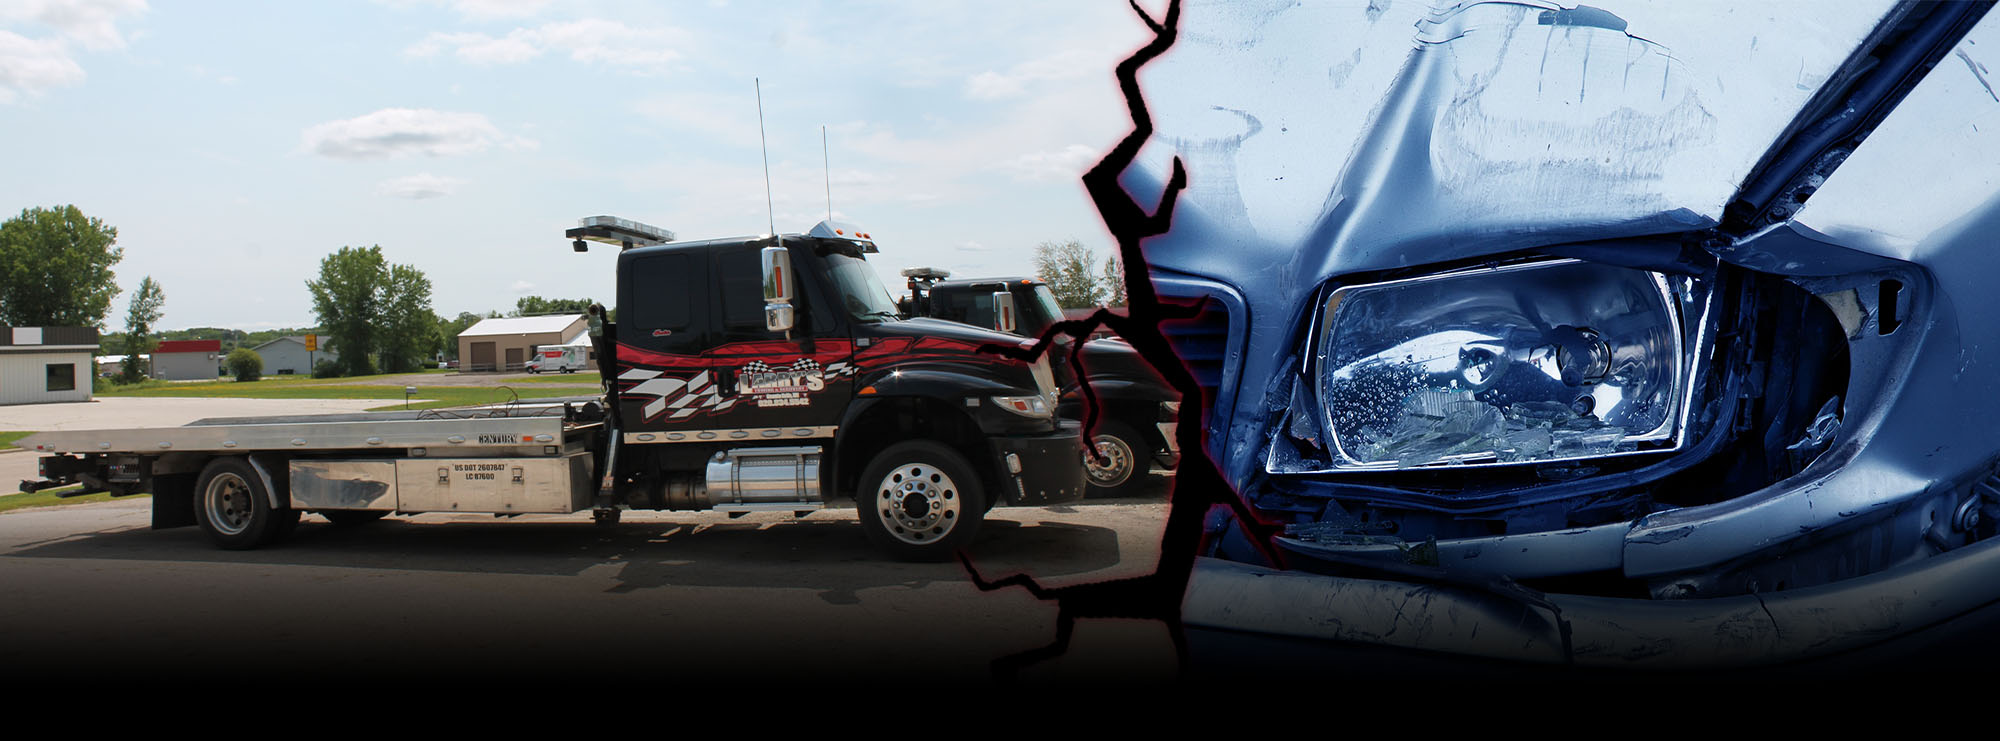 Larry's Towing and Recovery Champion Collsion Repair